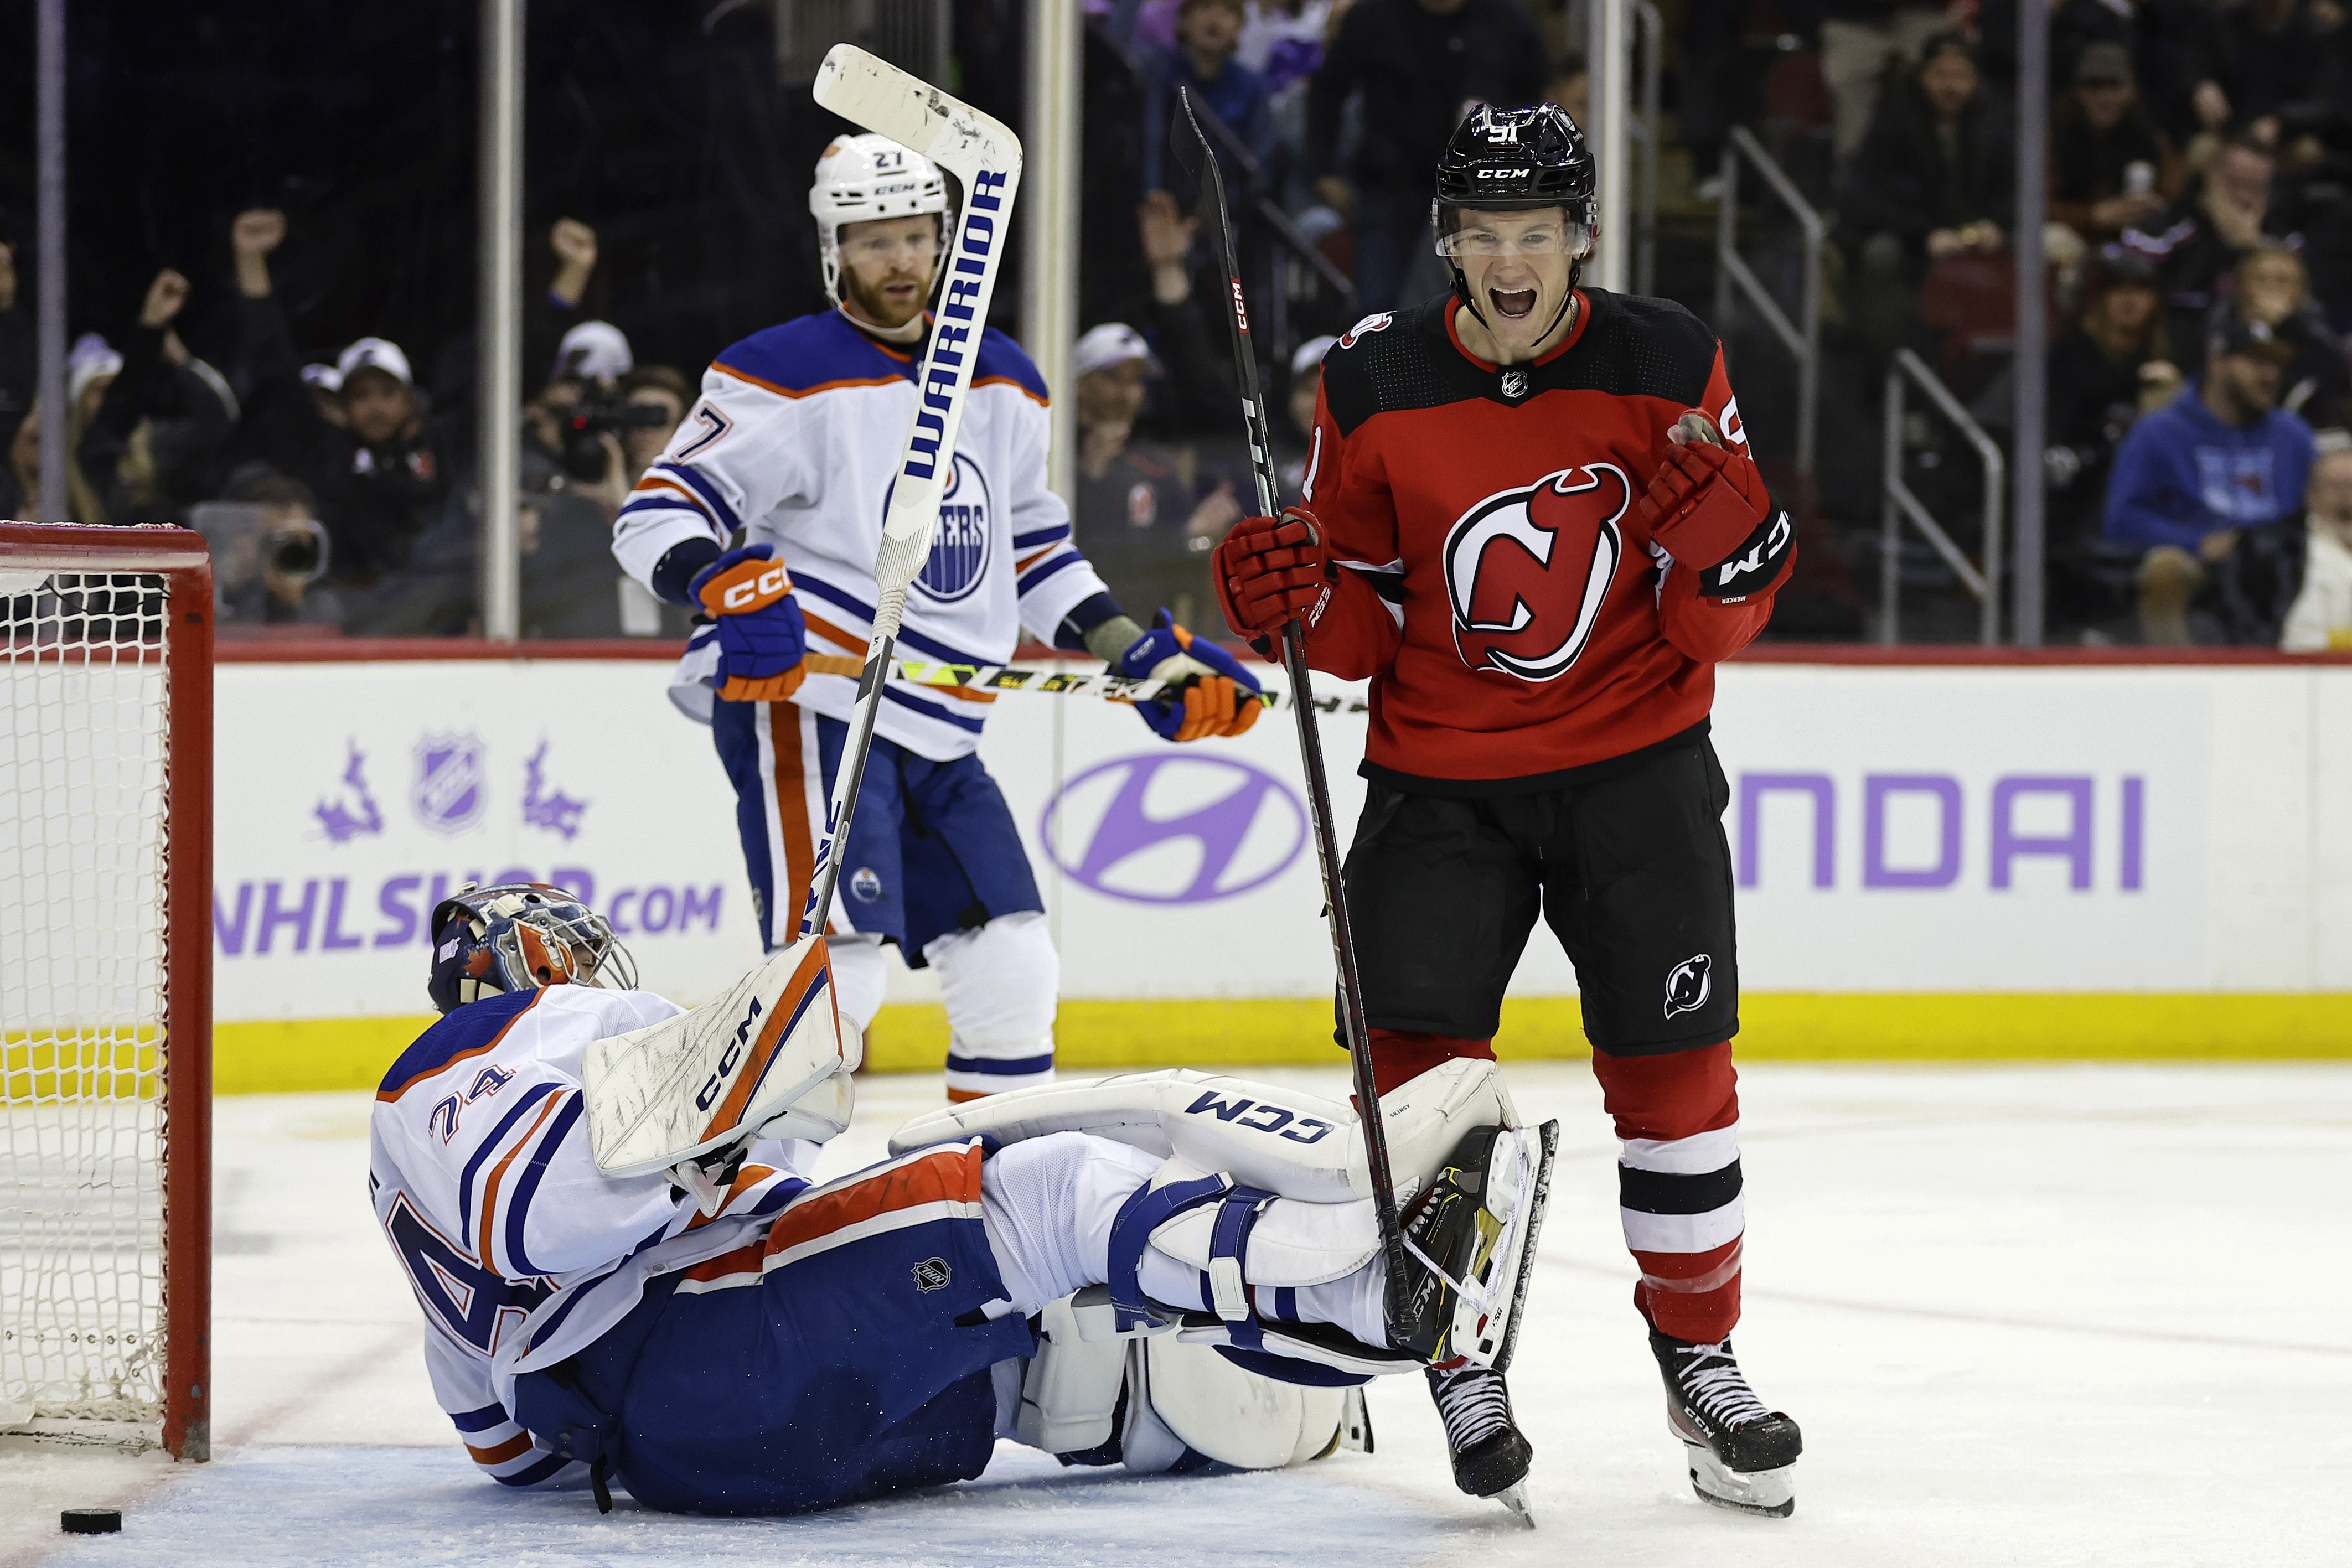 Three takeaways from Edmonton Oilers' 4-0 victory over New Jersey Devils